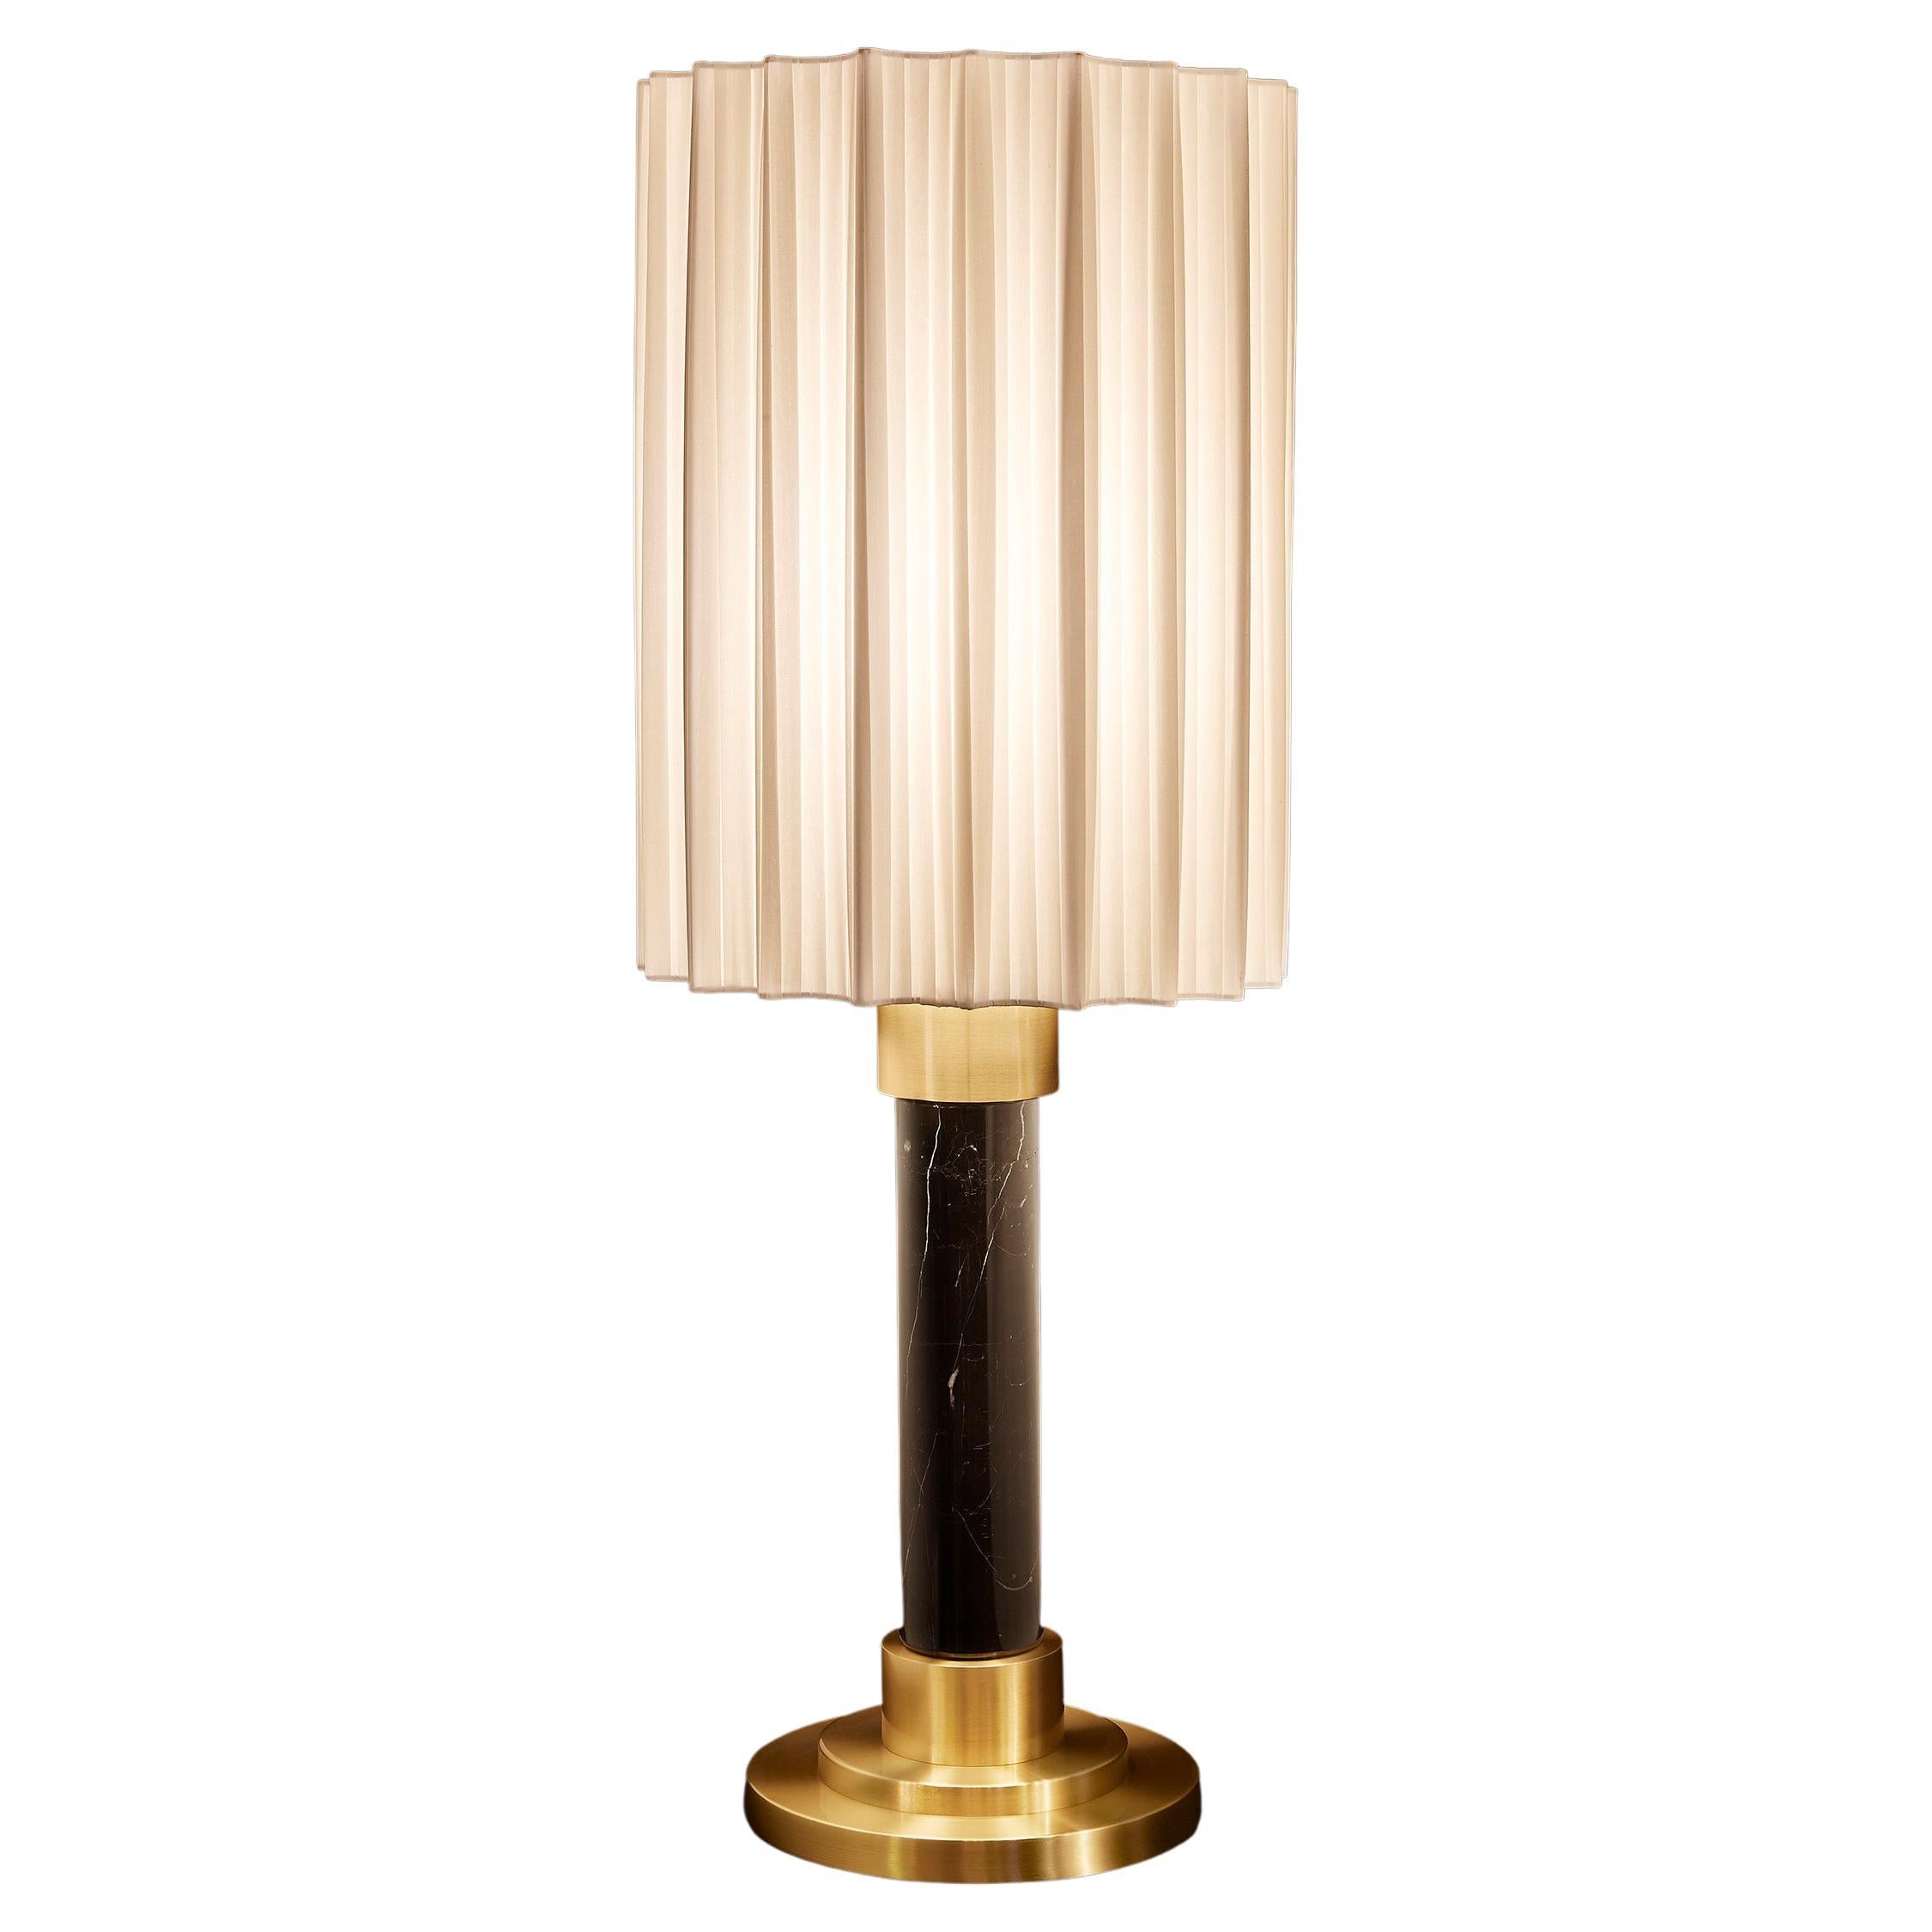 Imagin Black Marble and Brushed Brass Table Lamp